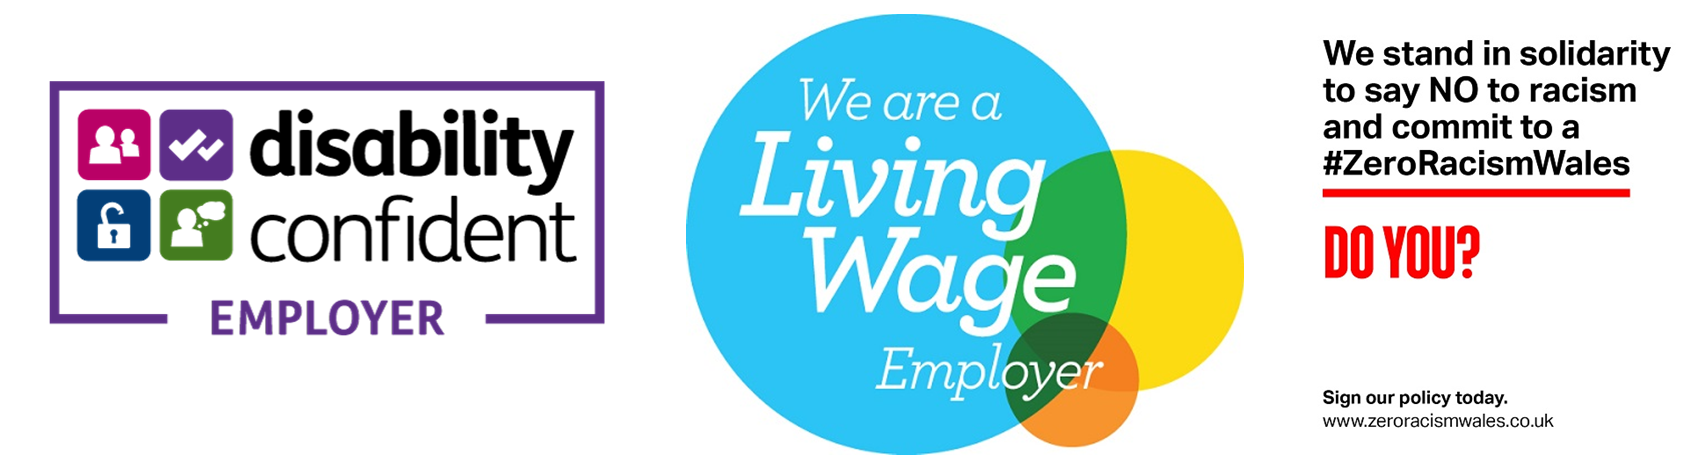 logos: disability confident employer, living wage employer, anti-racism